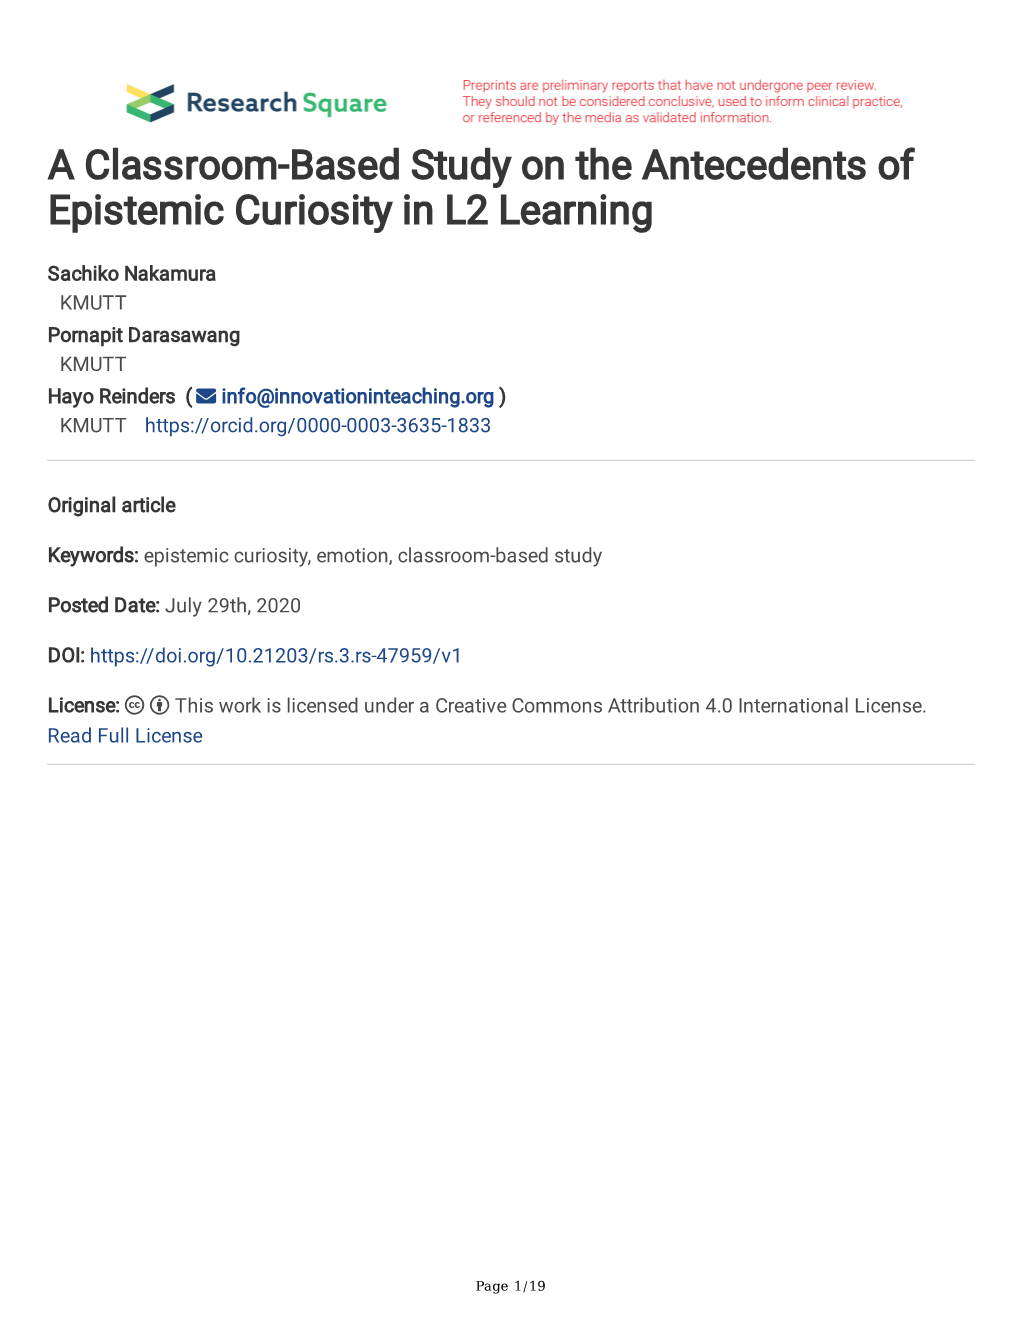 A Classroom-Based Study on the Antecedents of Epistemic Curiosity in L2 Learning